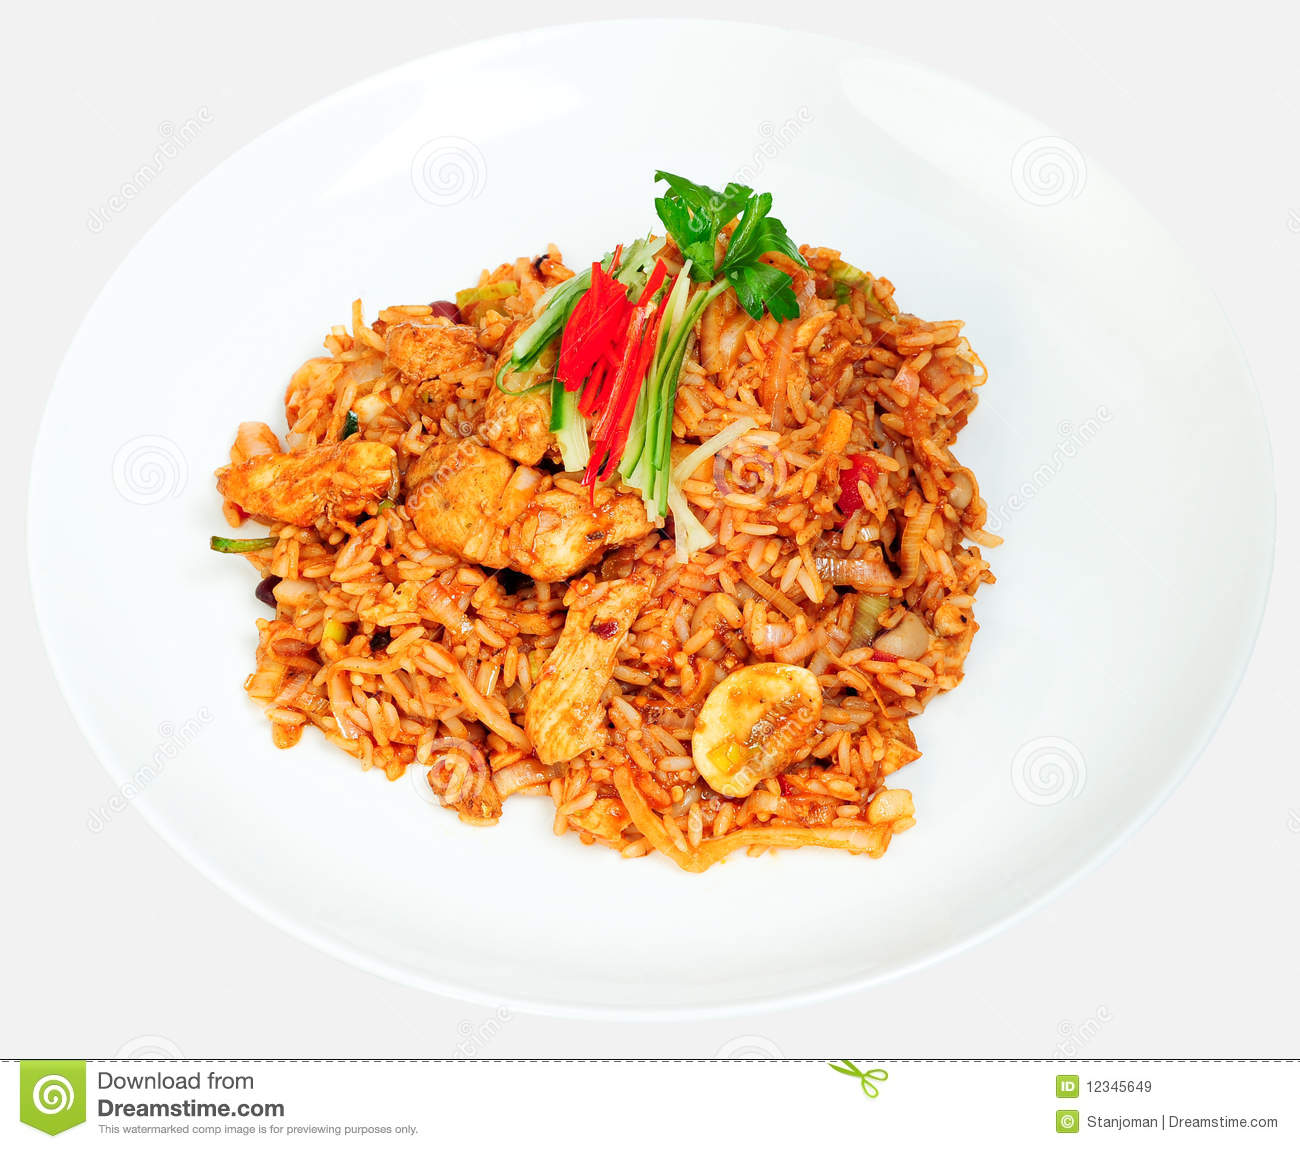 Spicy Chicken Noodles Royalty Free Stock Images   Image  12345649